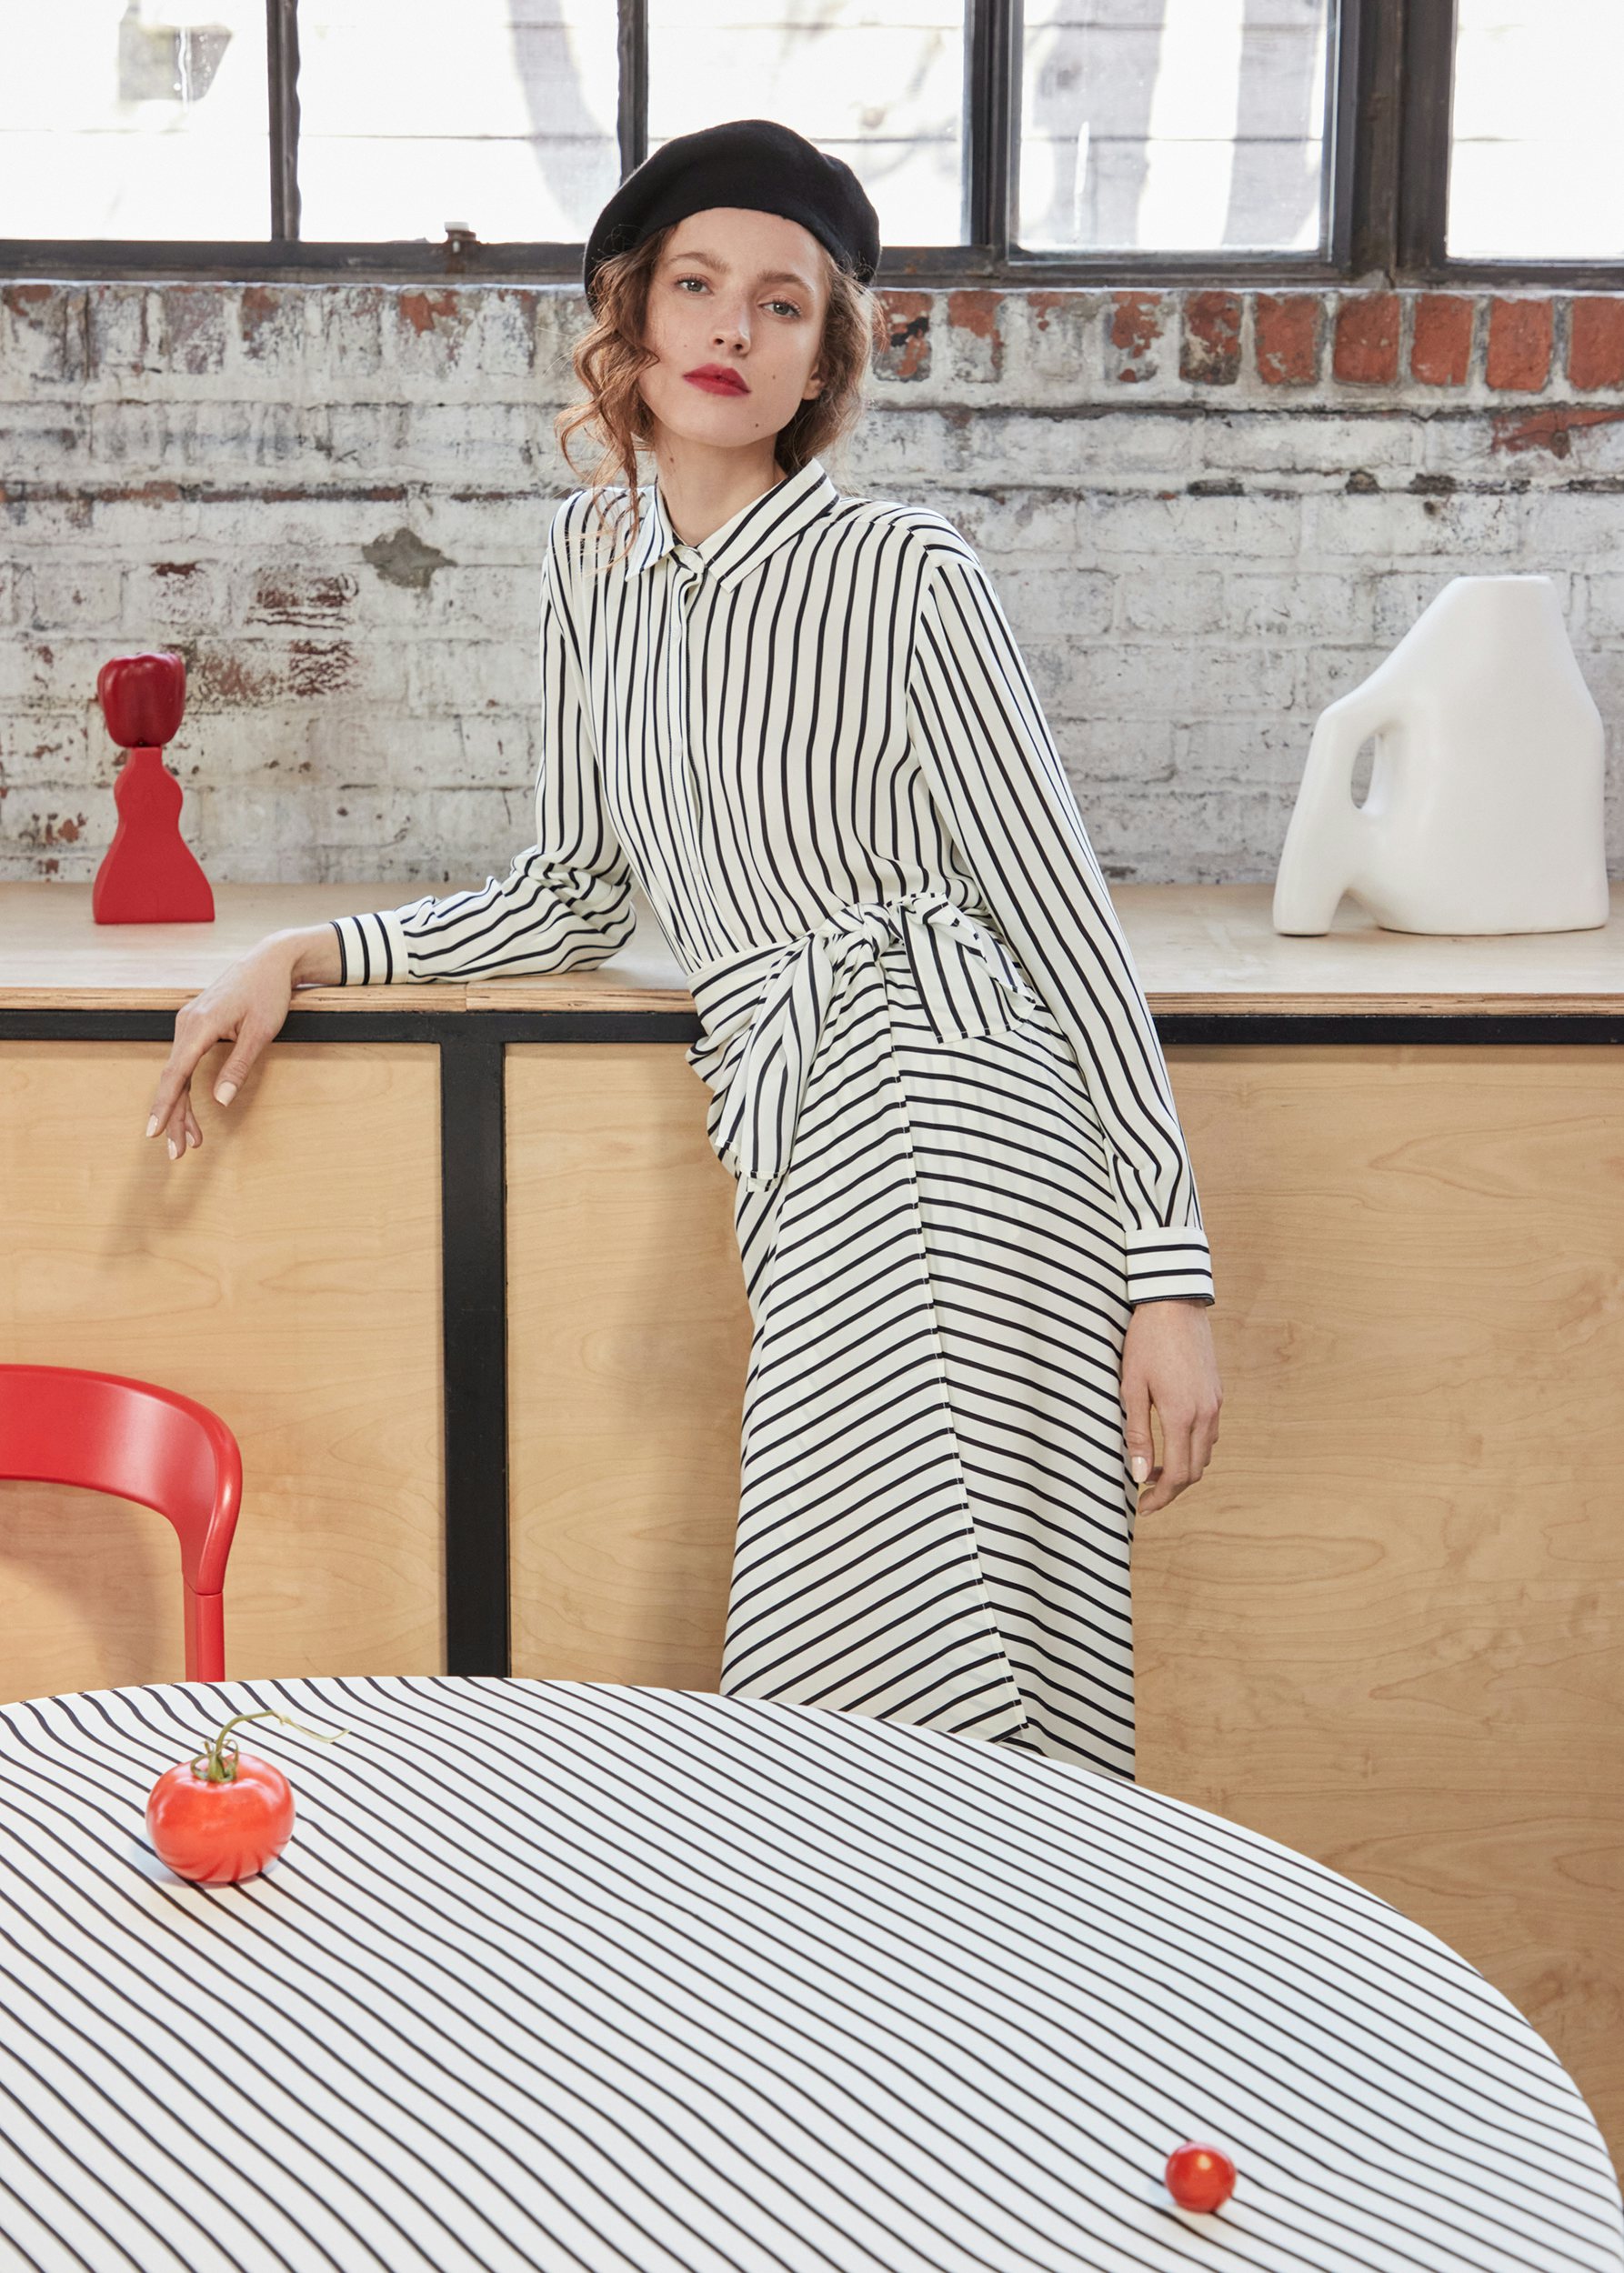 Model wearing the KULE Ponza black and white stripe silk top, with matching Elba black and white stripe wrap skirt. She is wearing a black beret and leaning on a counter. It's all so very French-inspired.